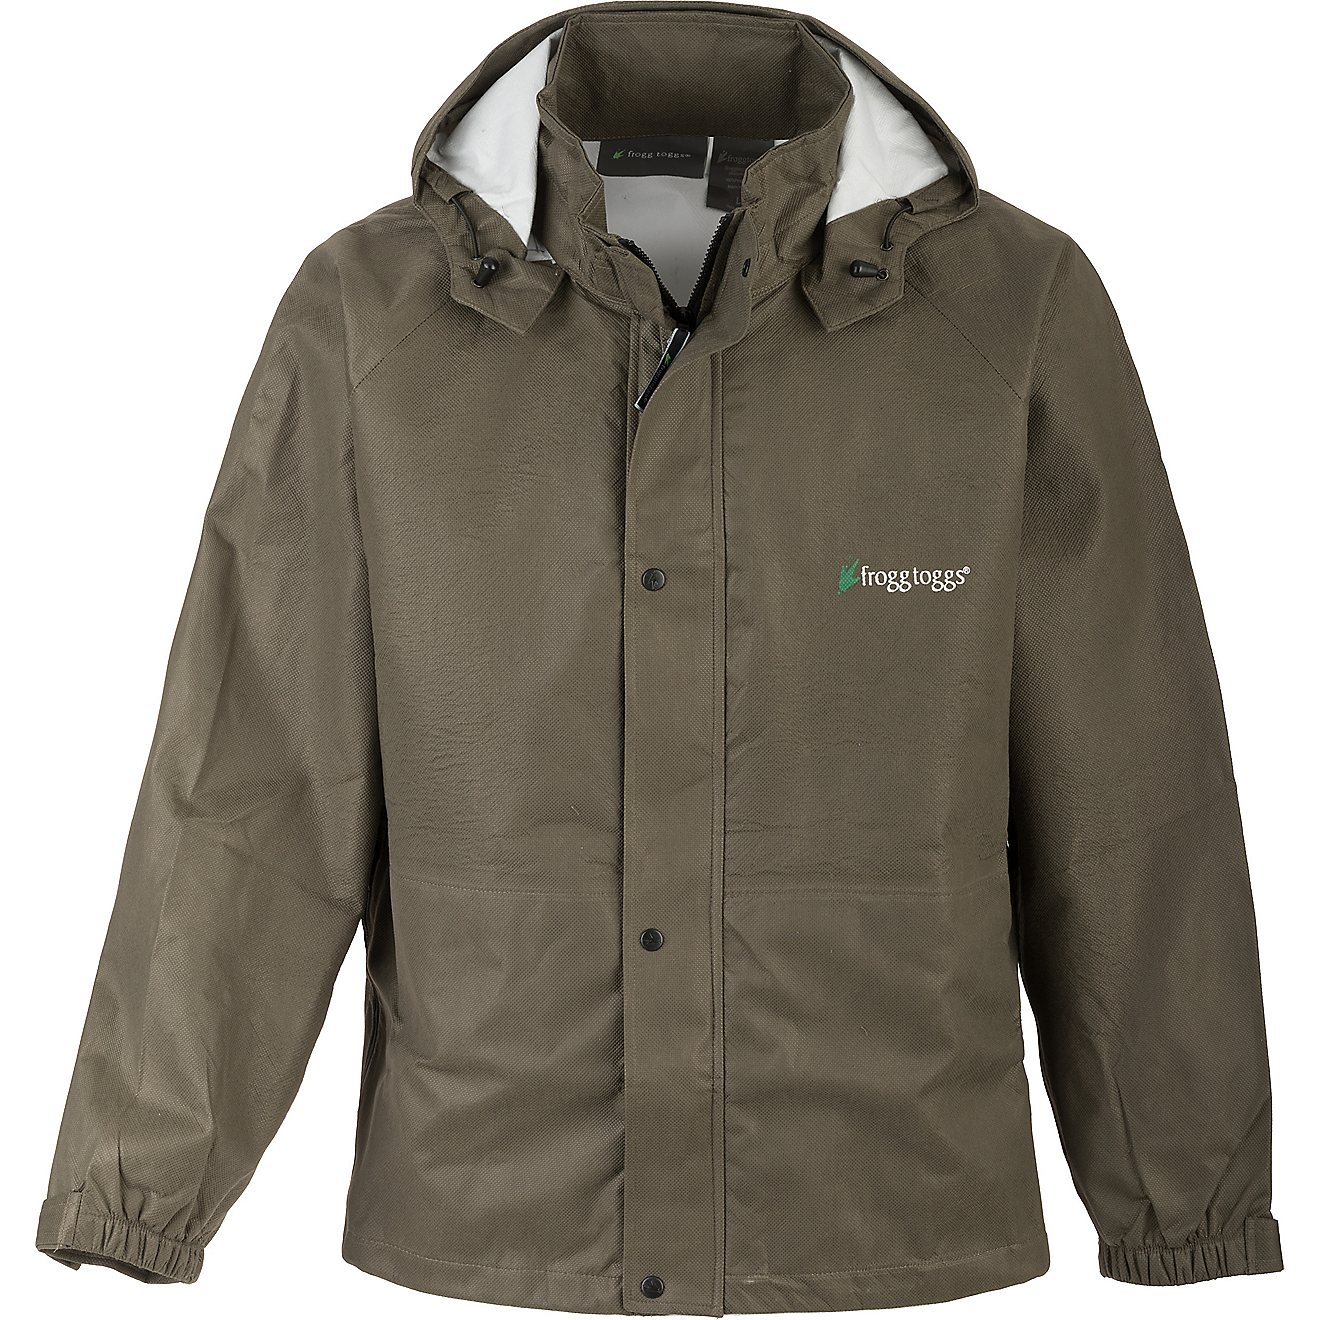 Frogg toggs Men's Bull Frogg Rain Jacket                                                                                         - view number 1